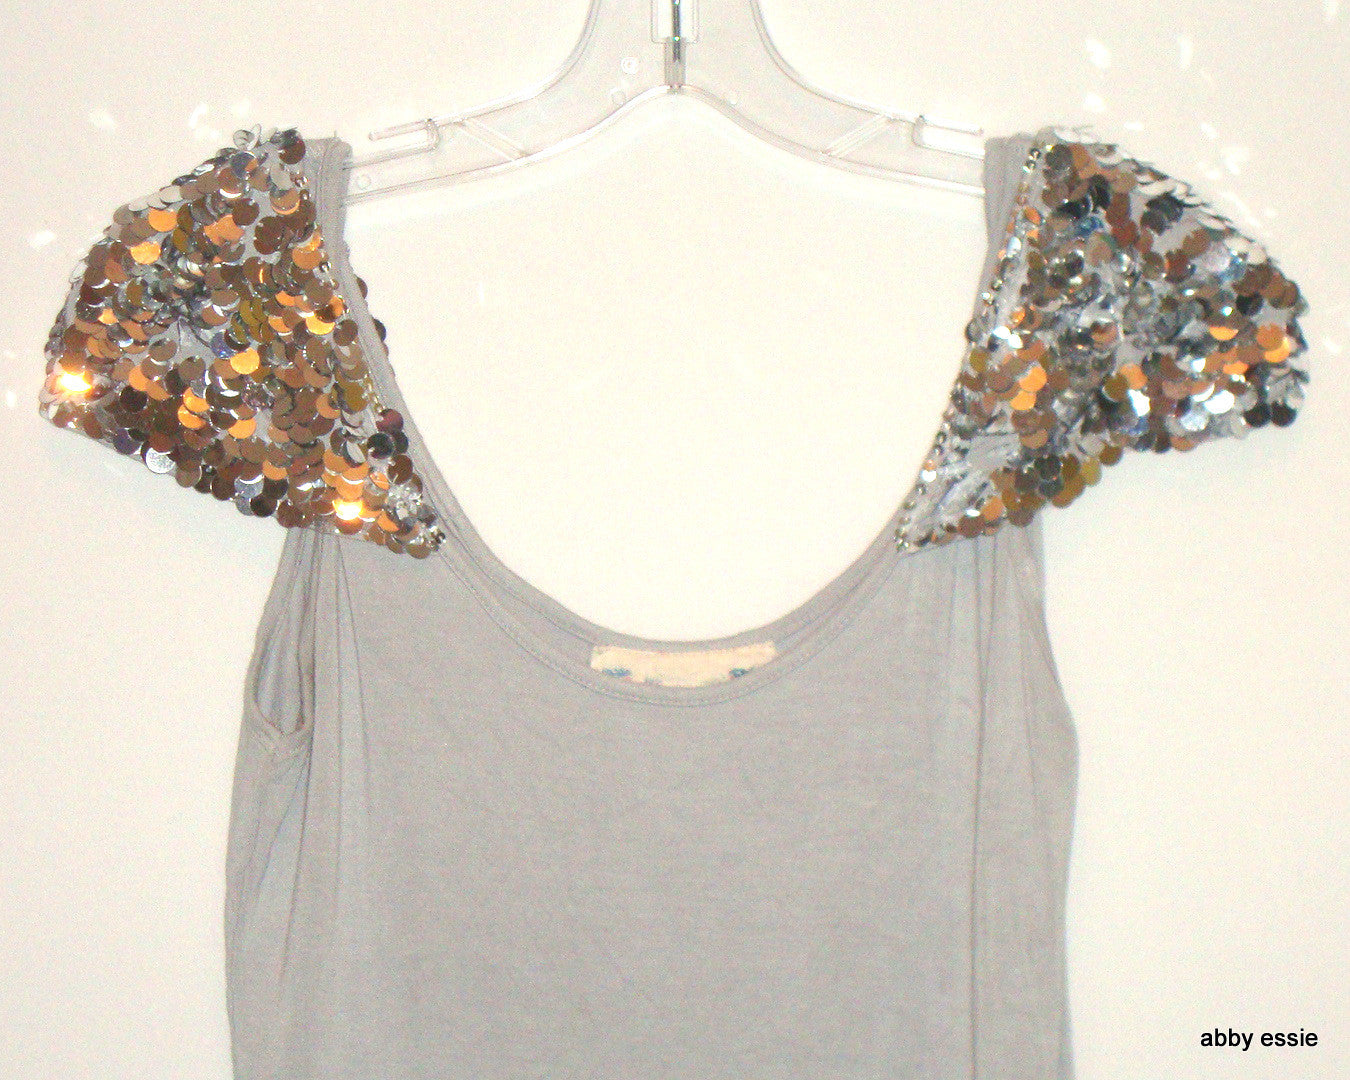 Faith Gray Sequin Shoulder Knit Stretch Cocktail Club Casual Tank Small Lt-2736